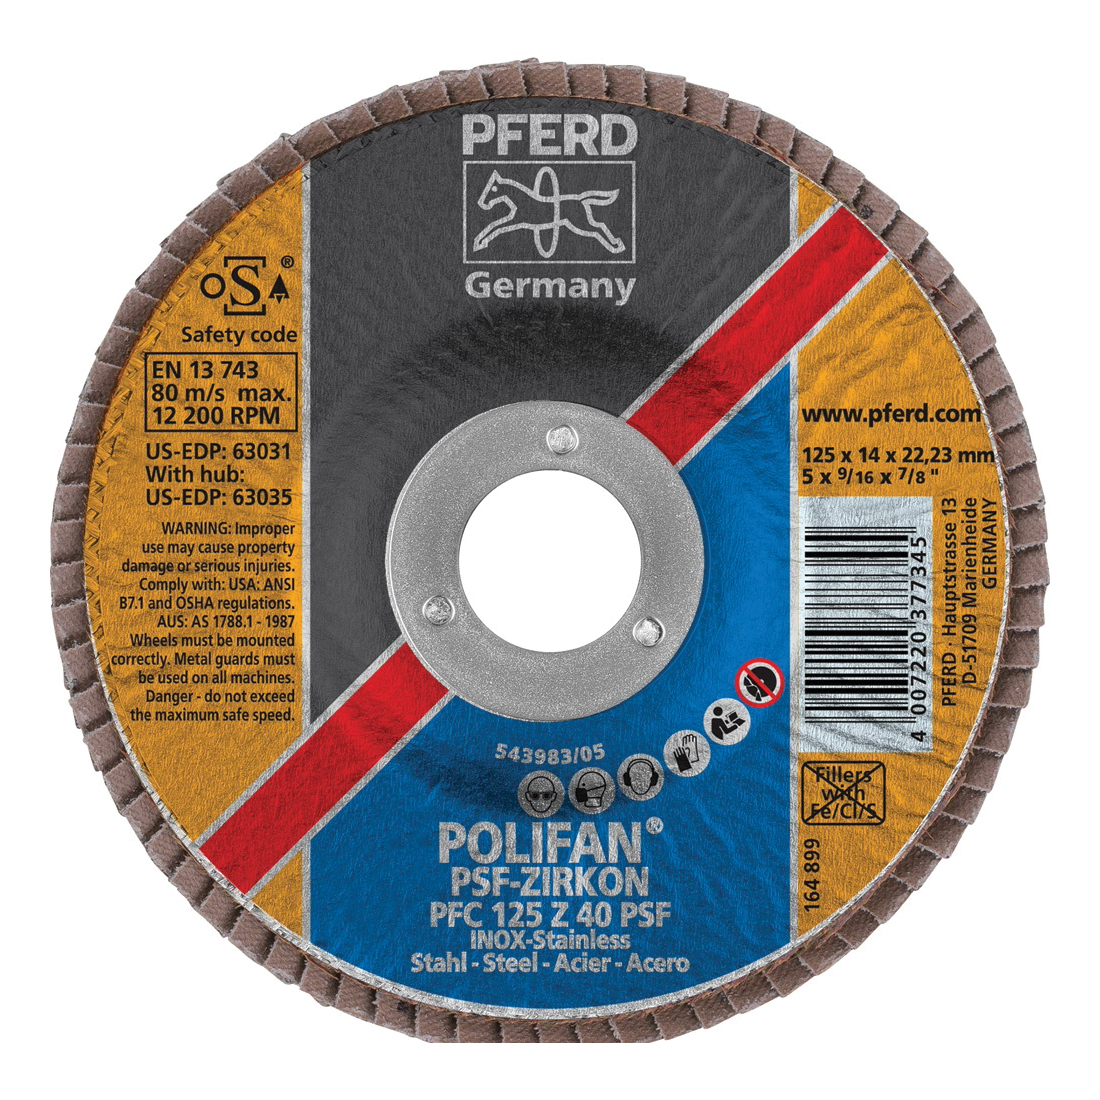 PFERD Polifan® 63031 Universal Line PSF-Z Unthreaded Coated Abrasive Flap Disc, 5 in Dia, 7/8 in Center Hole, 40 Grit, Zirconia Alumina Abrasive, Type 29 Conical Disc